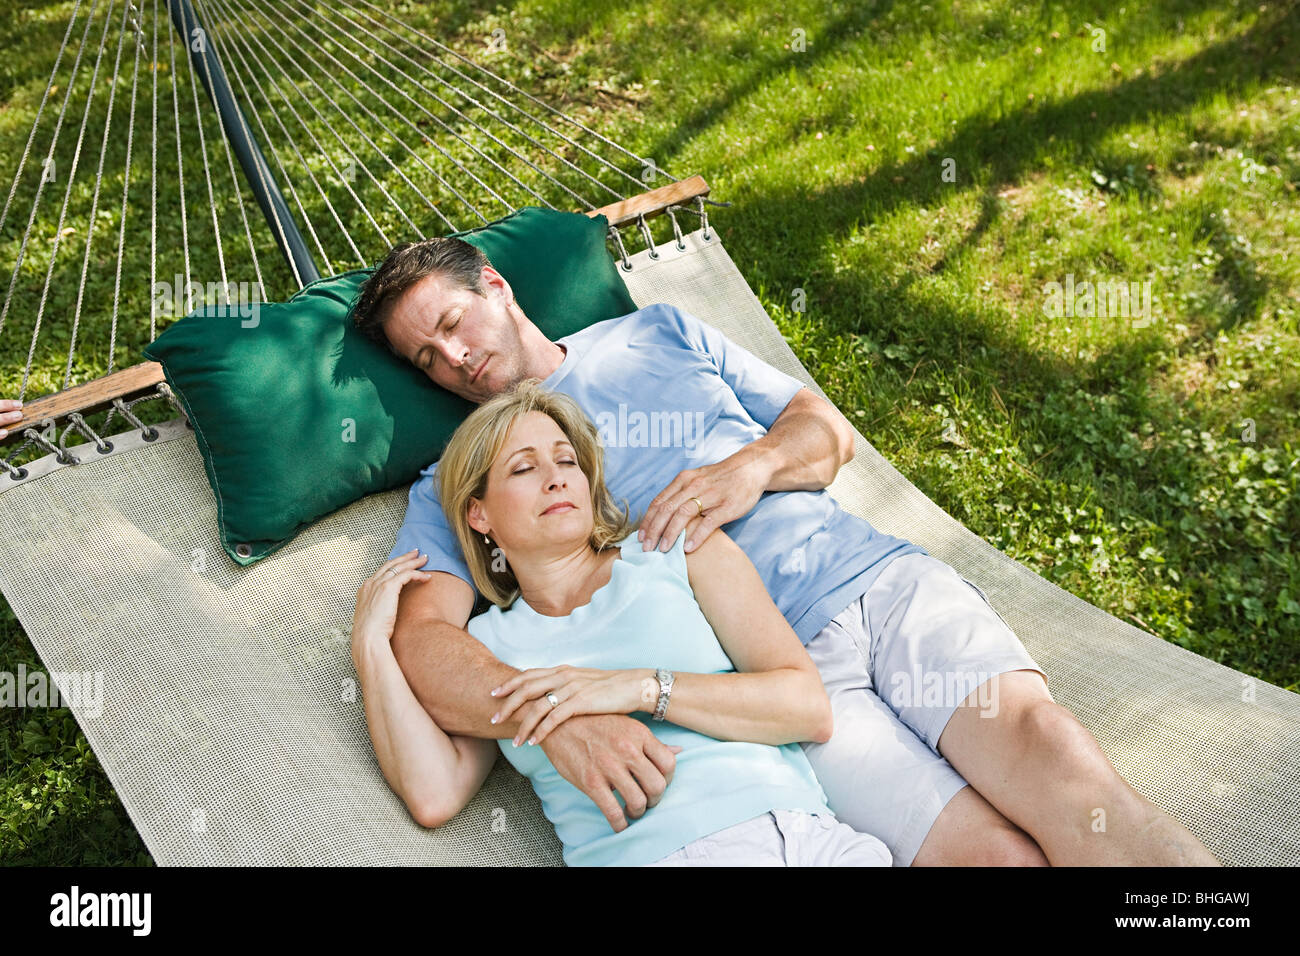 Couple lying in hammock Banque D'Images